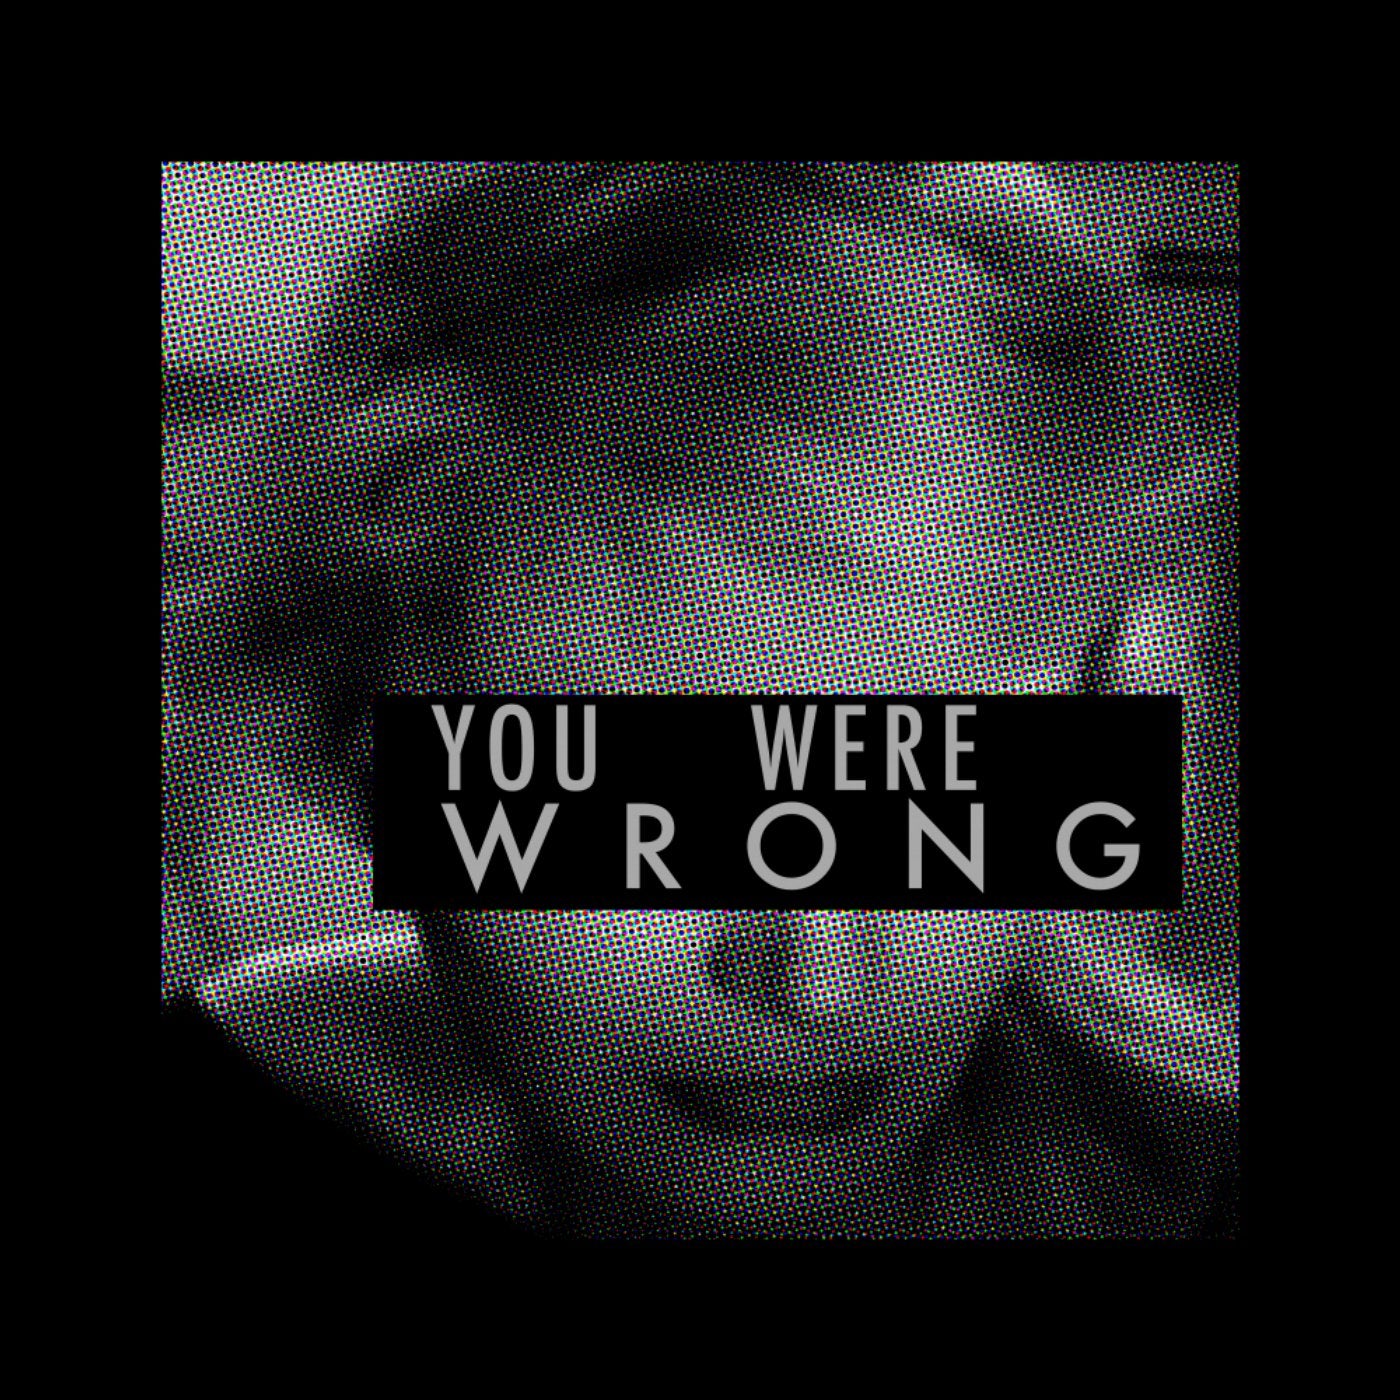 You Were Wrong